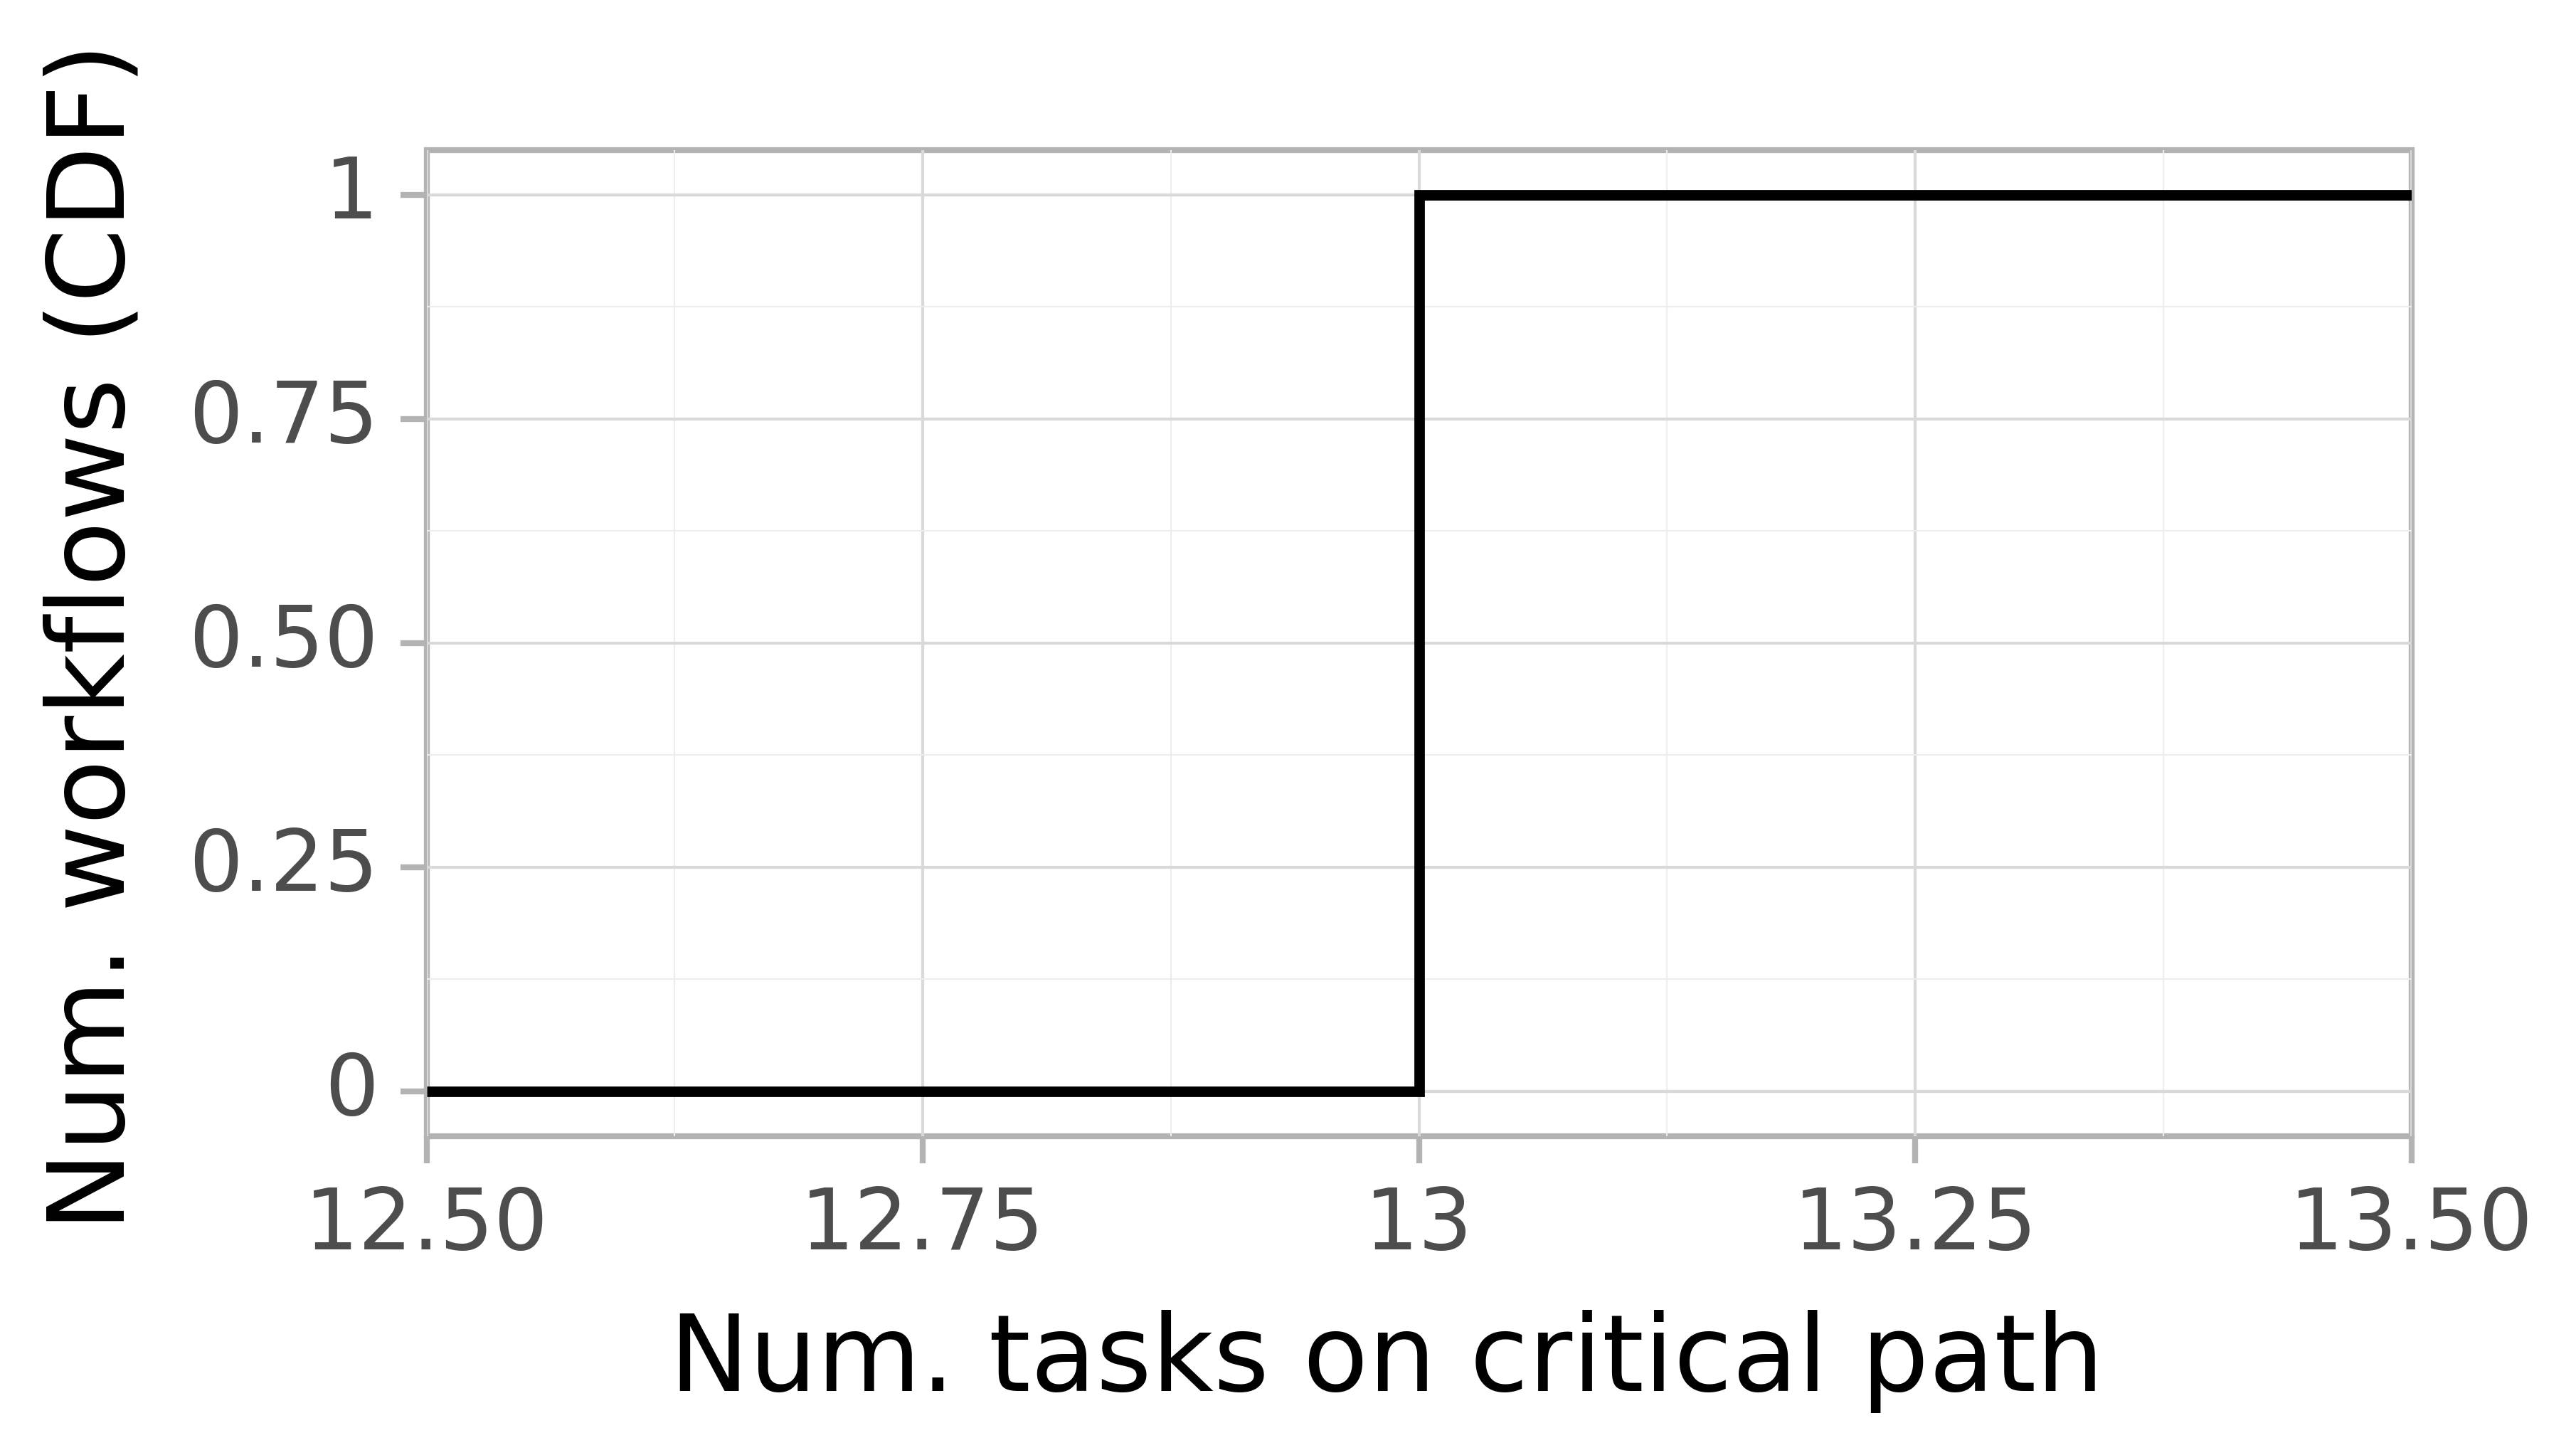 Job critical path task count graph for the workflowhub_montage_ti01-971107n_degree-2-0_osg_schema-0-2_montage-2-0-osg-run007 trace.